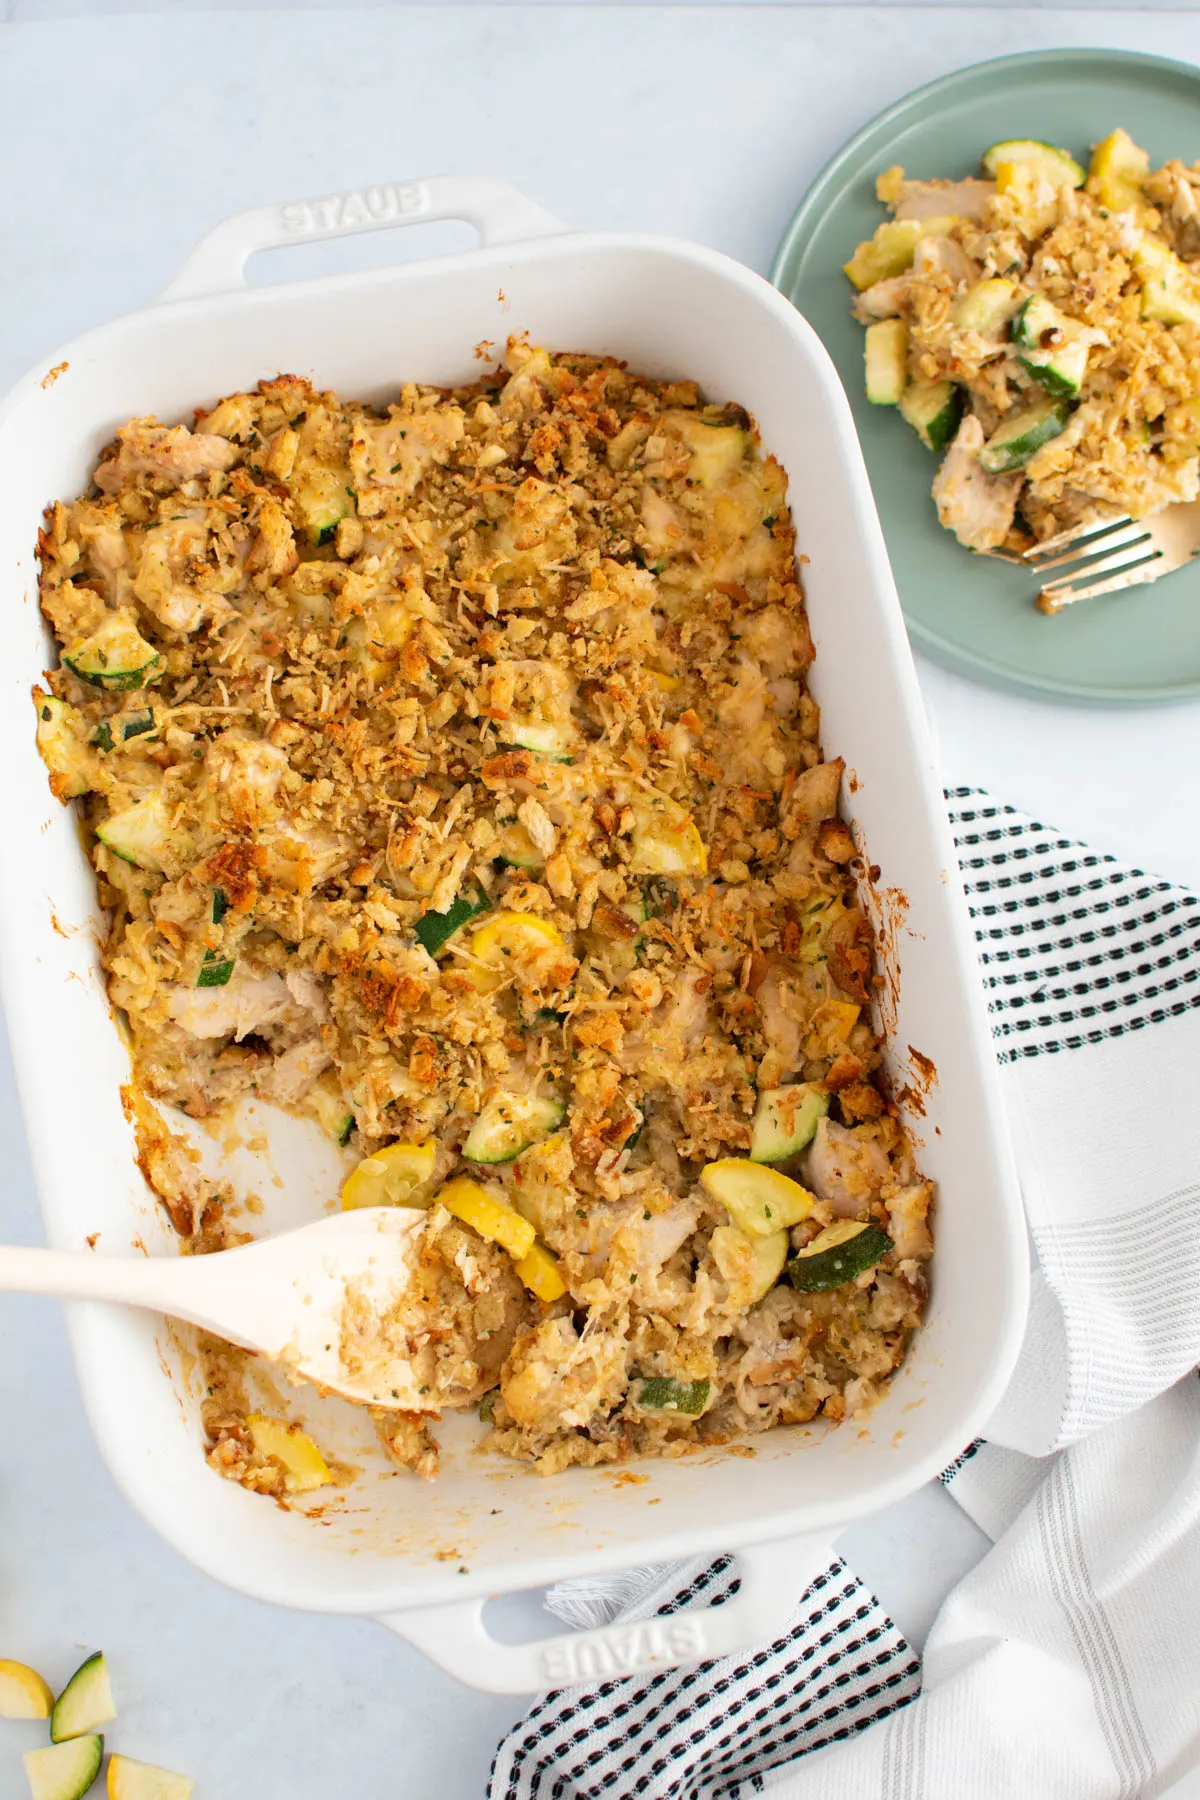 Chicken with Stove Top and zucchini casserole in white baking dish with wooden spoon and plate of casserole nearby.